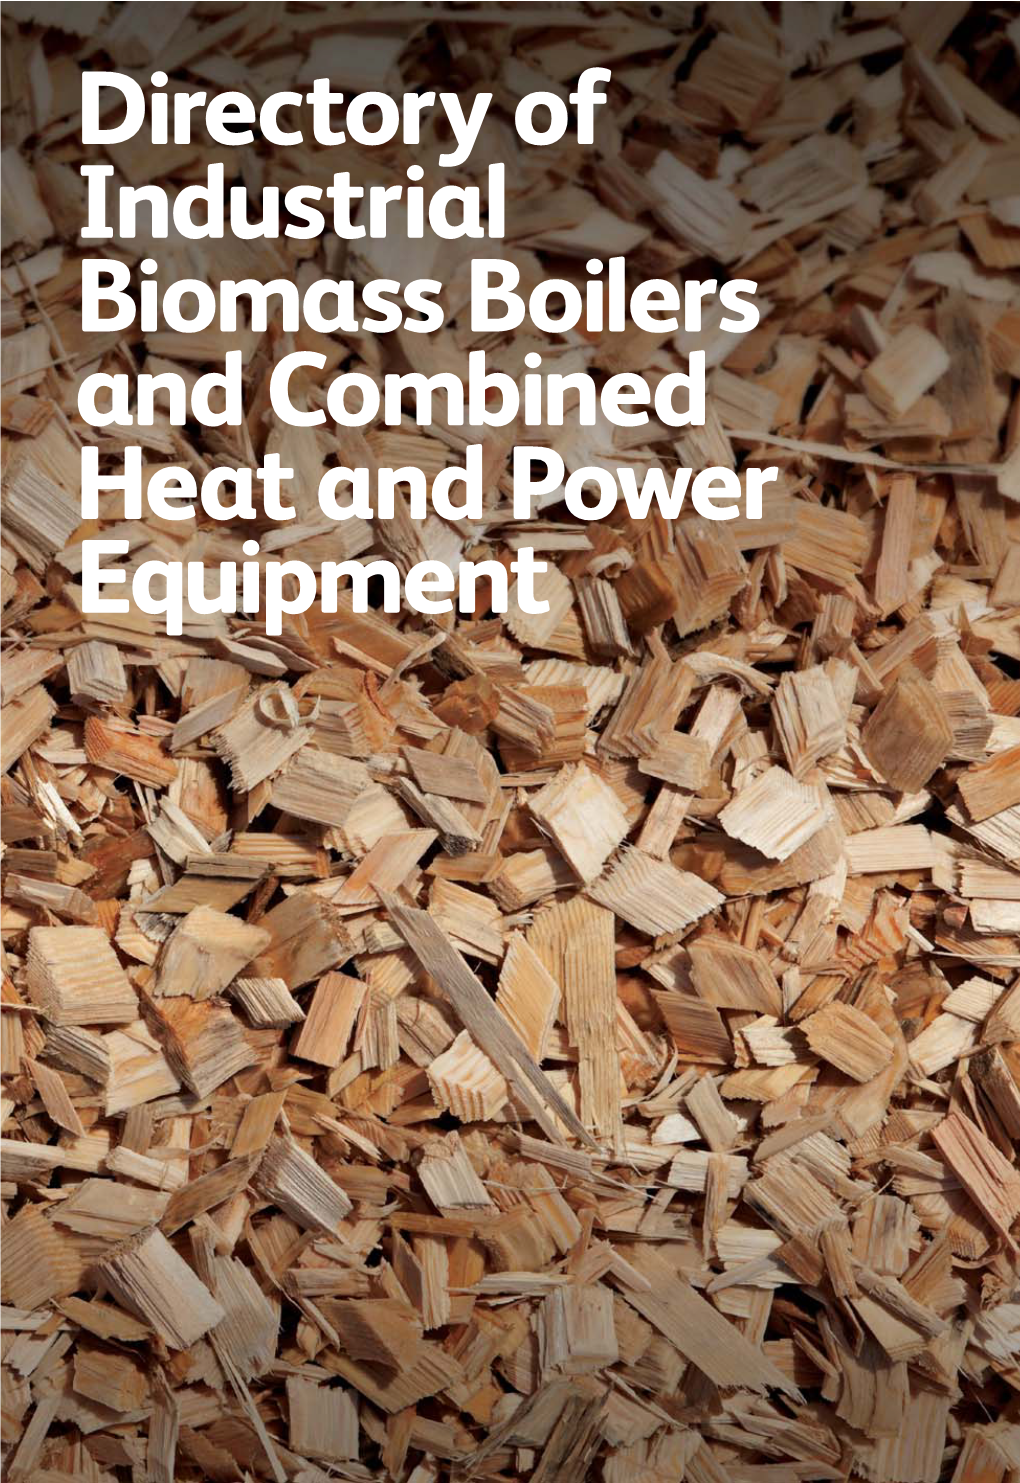 Directory of Industrial Biomass Boilers and Combined Heat and Power